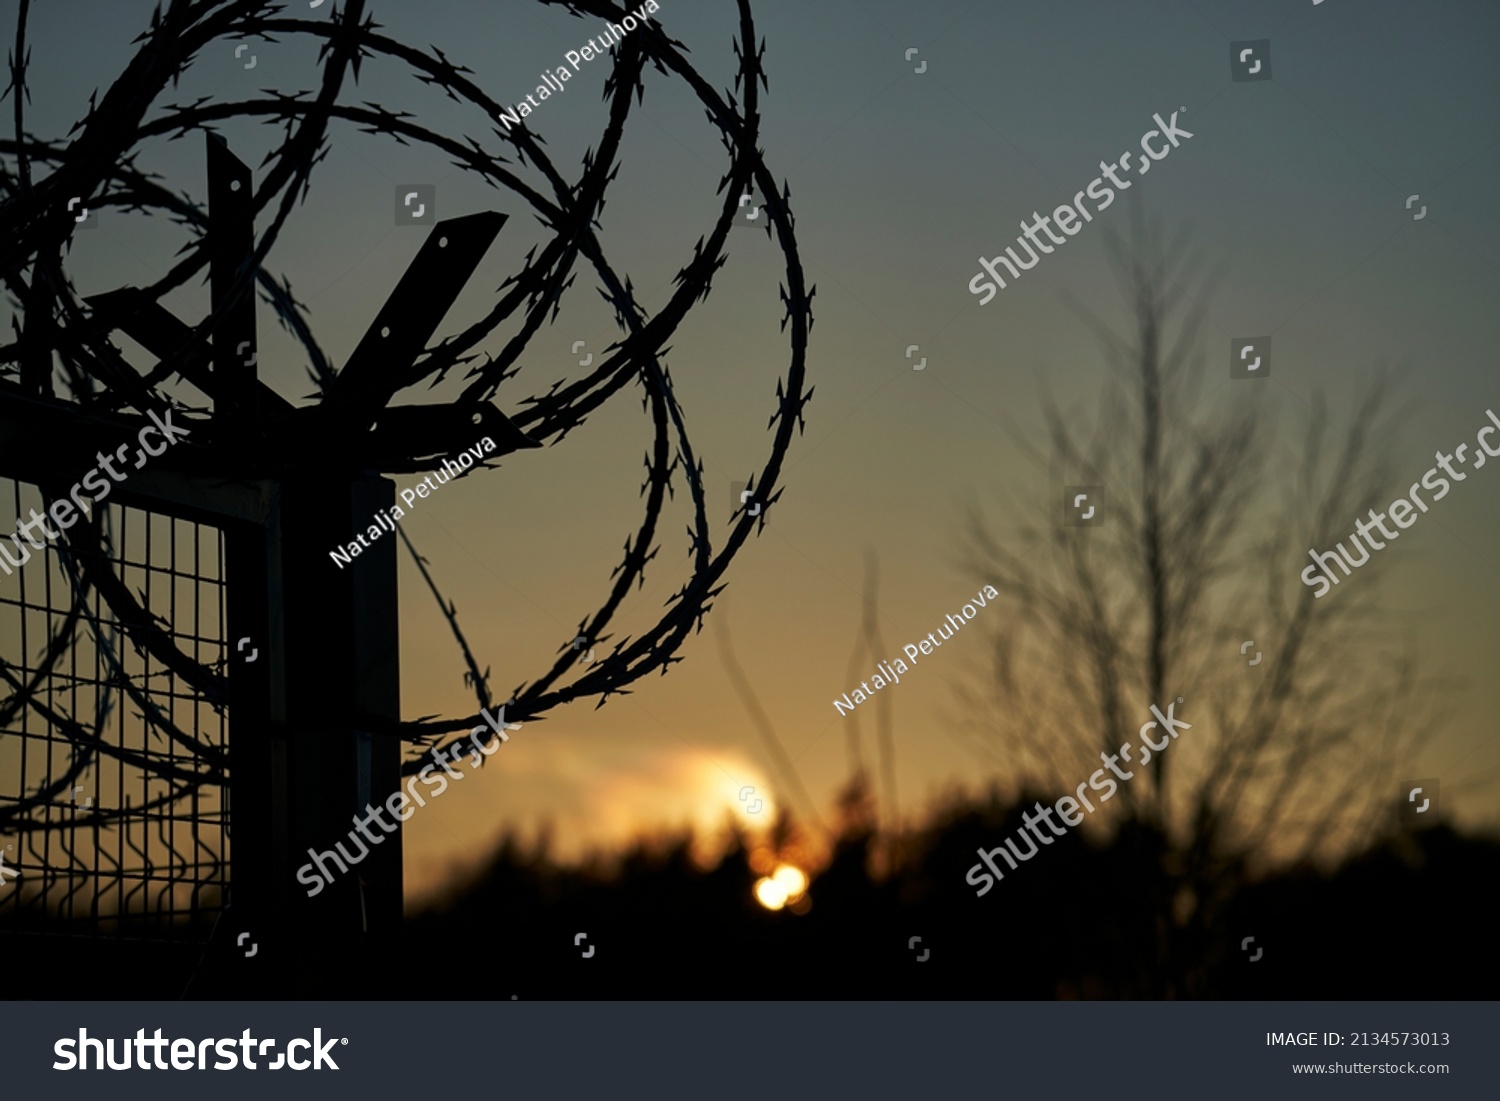 Barbed wire fence and Light of Hope. #2134573013